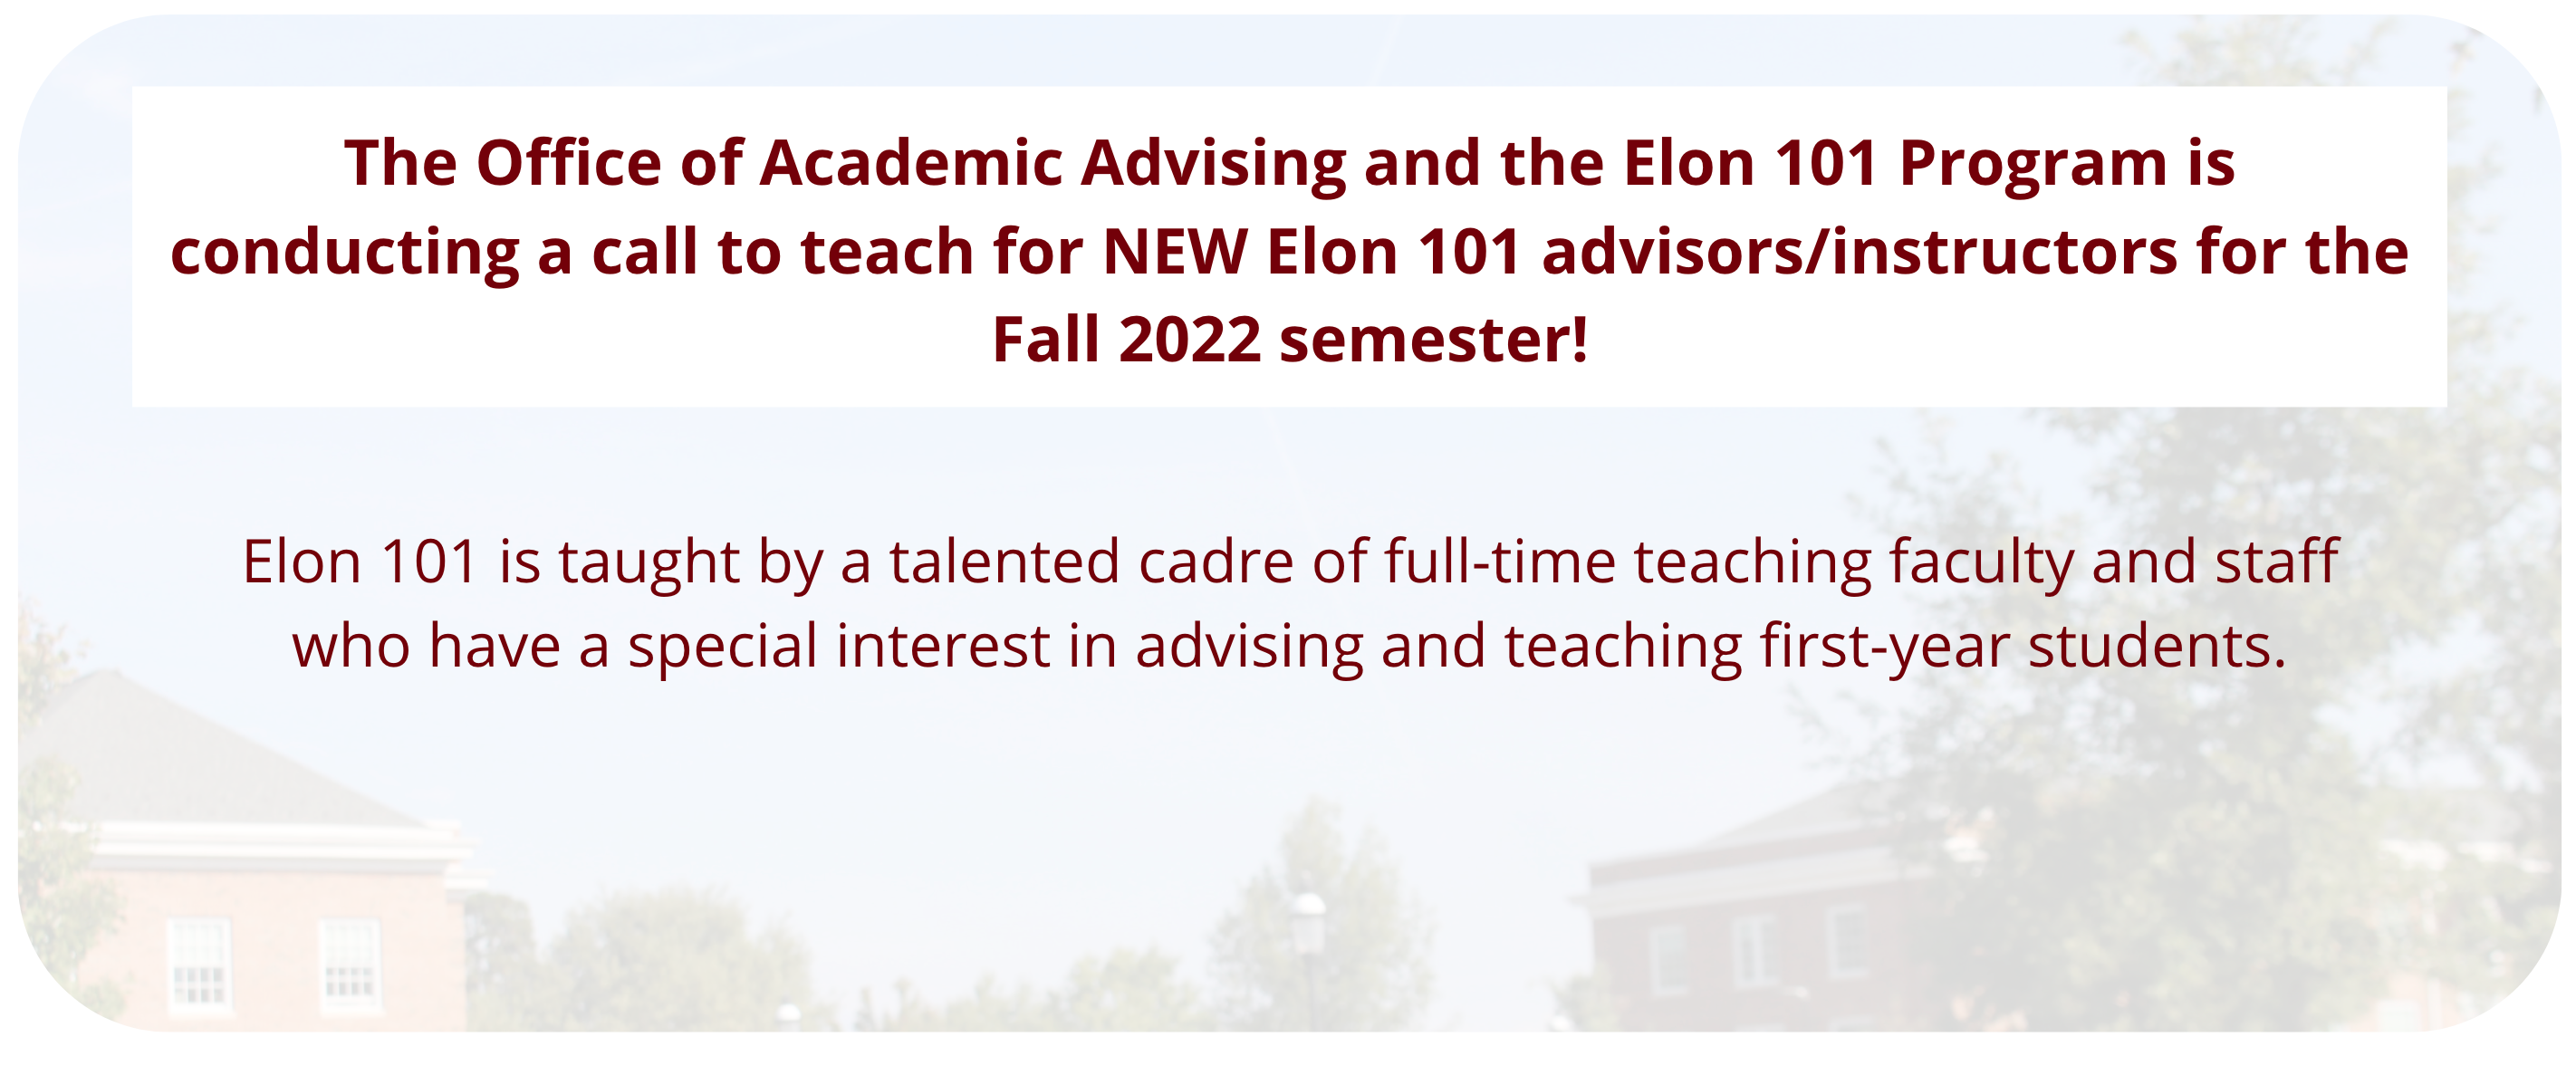 The Office of Academic Advising and the Elon 101 Program is conducting a call to teach for NEW Elon 101 advisors/instructors for the Fall 2021 semester. Elon 101 is taught by a talented cadre of full-time teaching faculty and staff who have a special interest in advising and teaching first-year students.